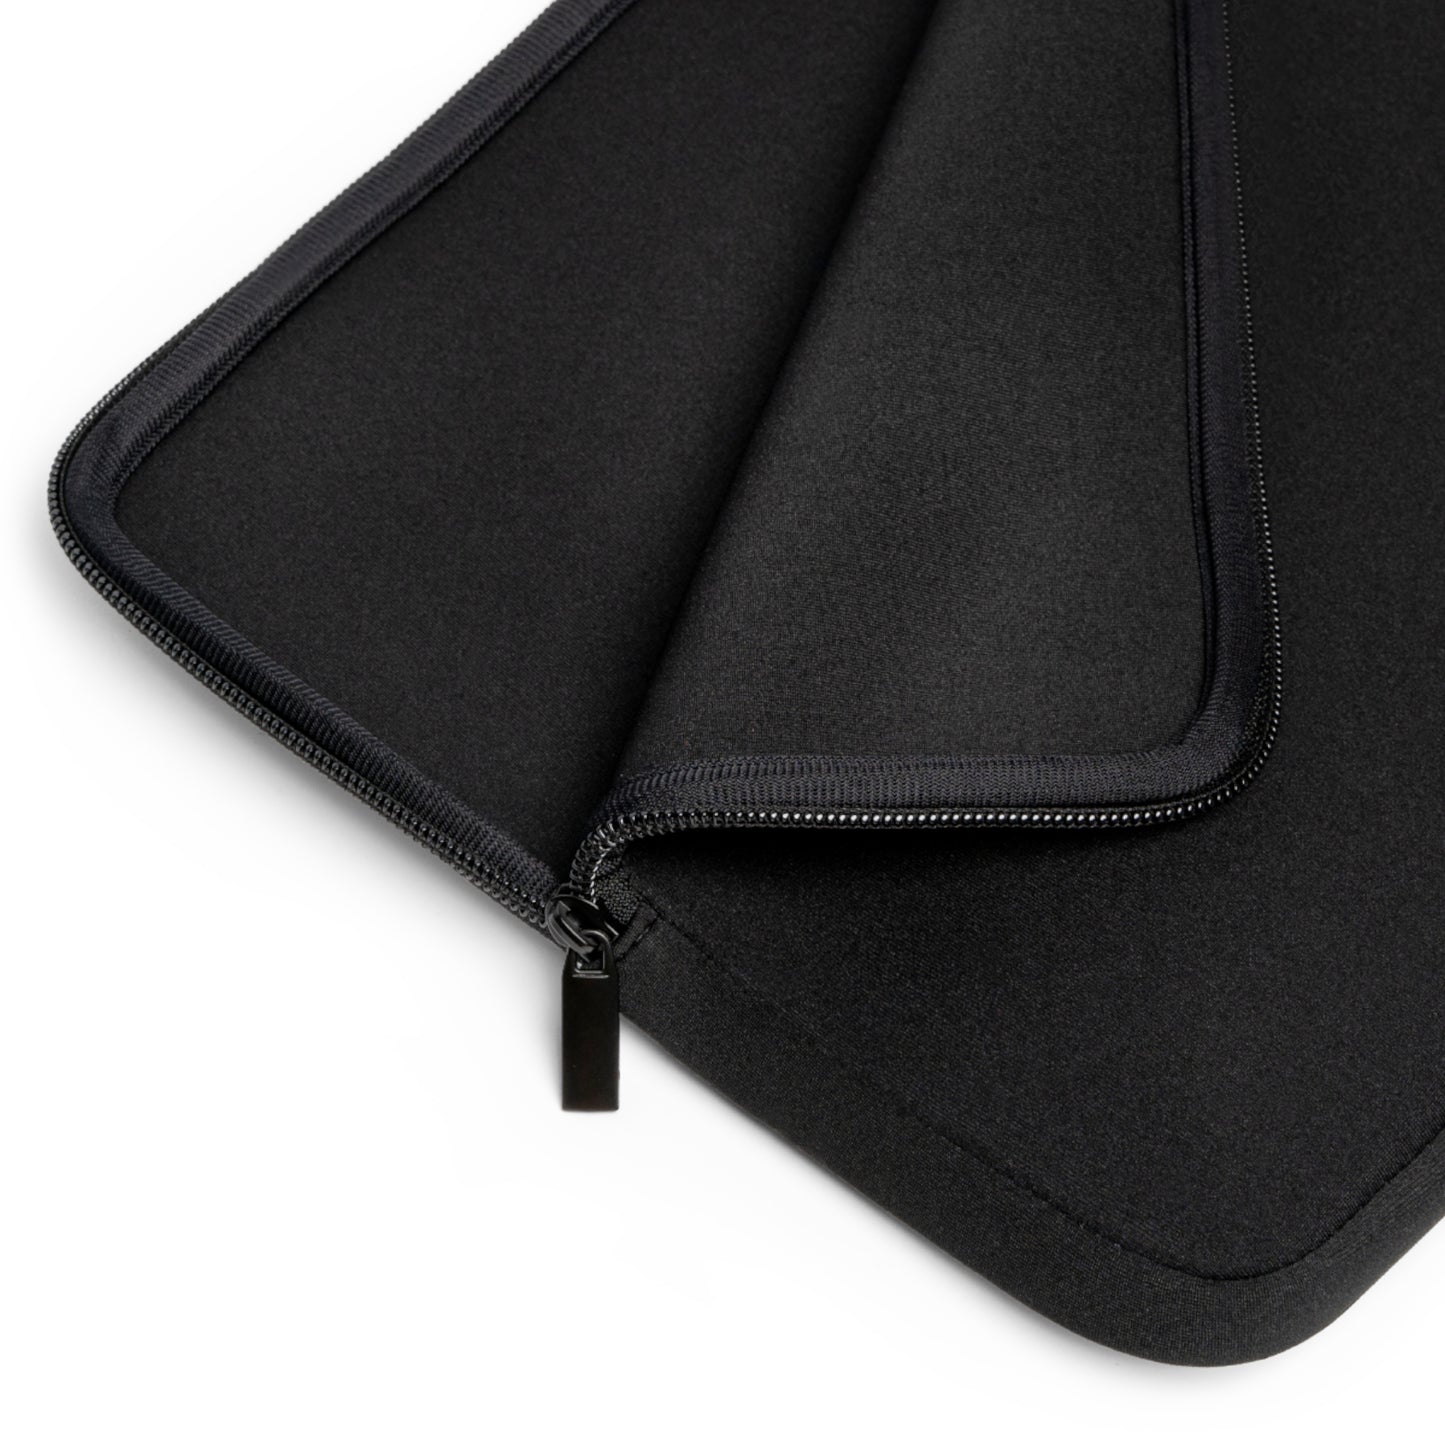 Professional Day Dreamer Laptop Sleeve in Black